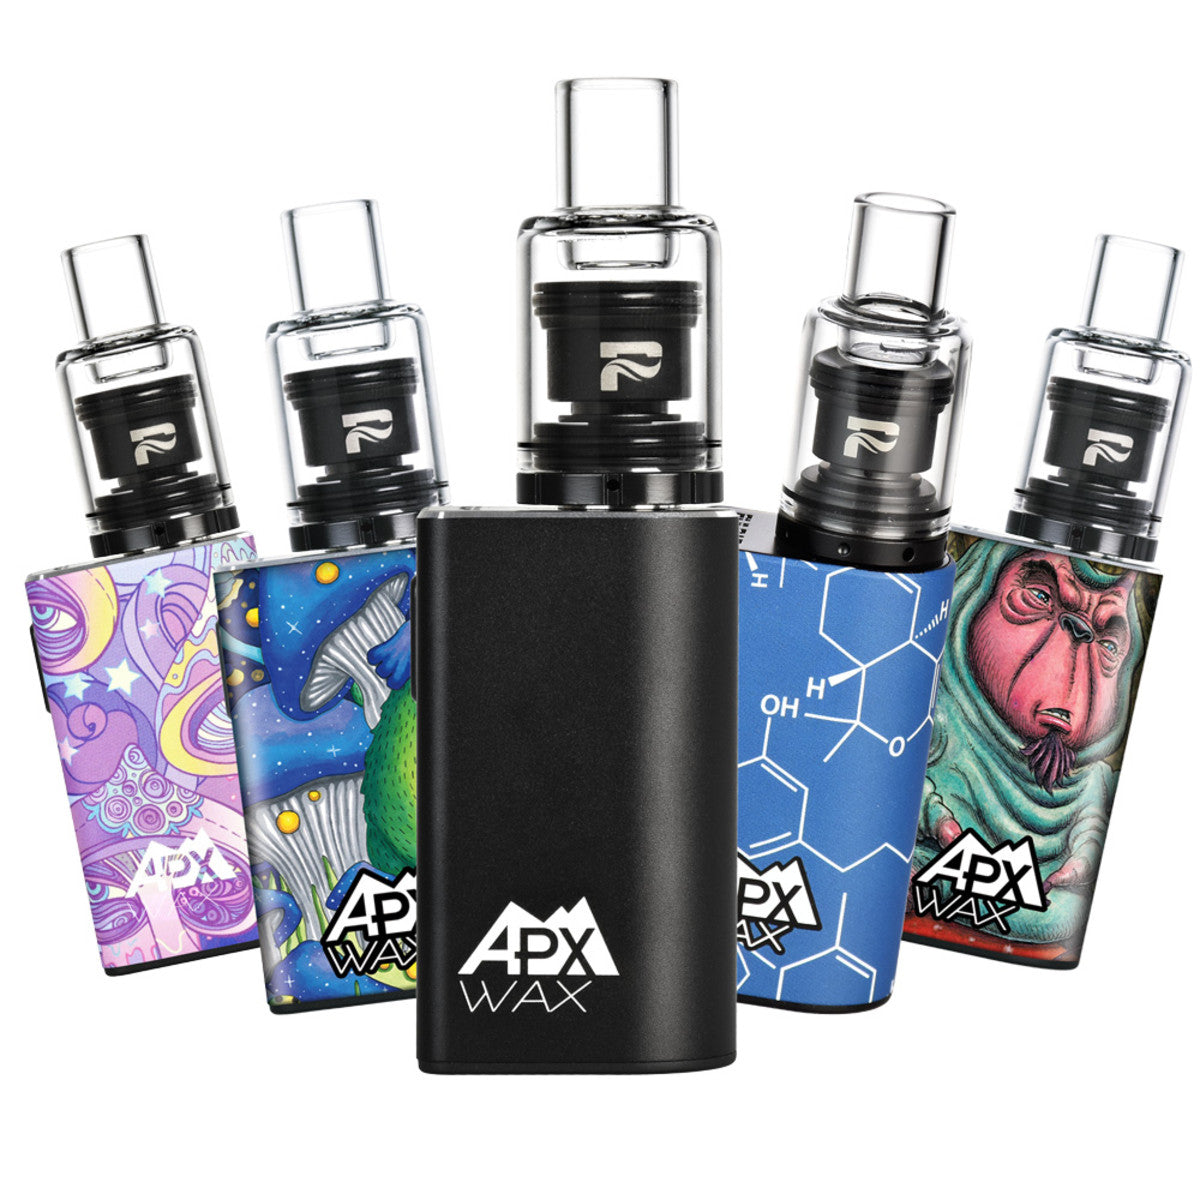 https://boomheadshop.com/cdn/shop/products/pulsar-apx-wax-v3-concentrate-vaporizer-colors.jpg?v=1669161518&width=1200